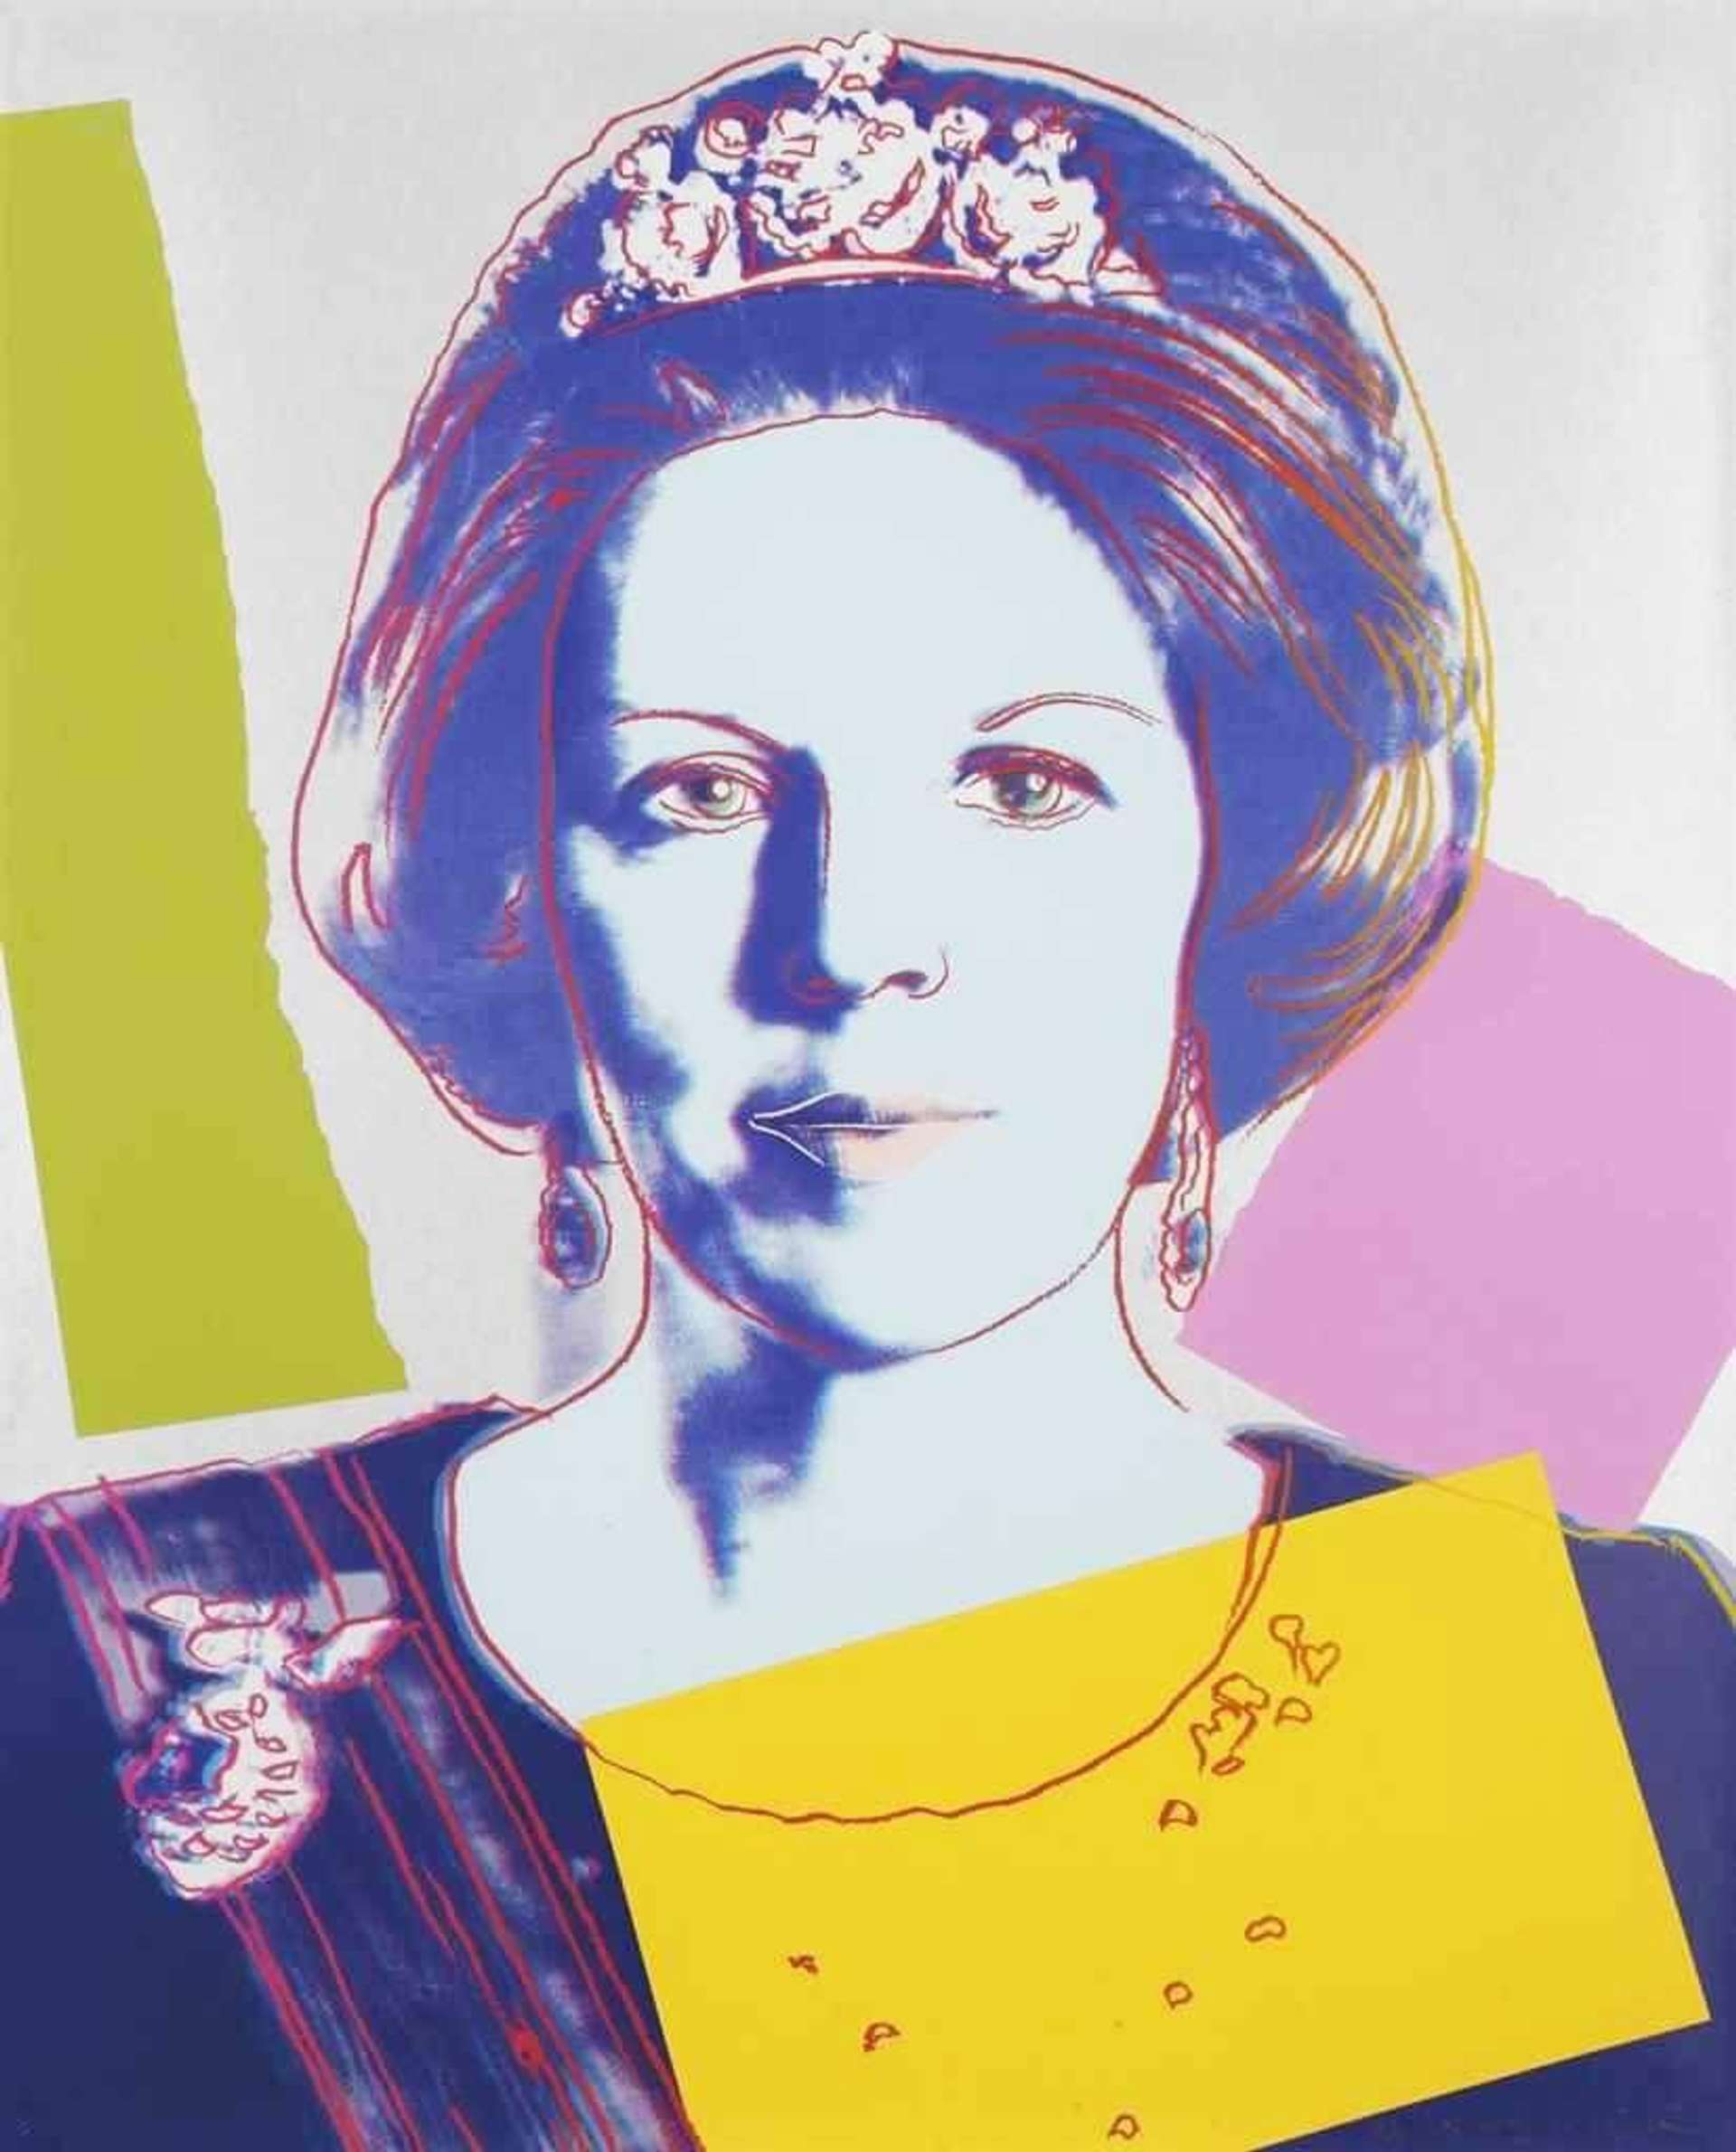 Queen Beatrix Of The Netherlands (F. & S. II.340) - Signed Print by Andy Warhol 1985 - MyArtBroker